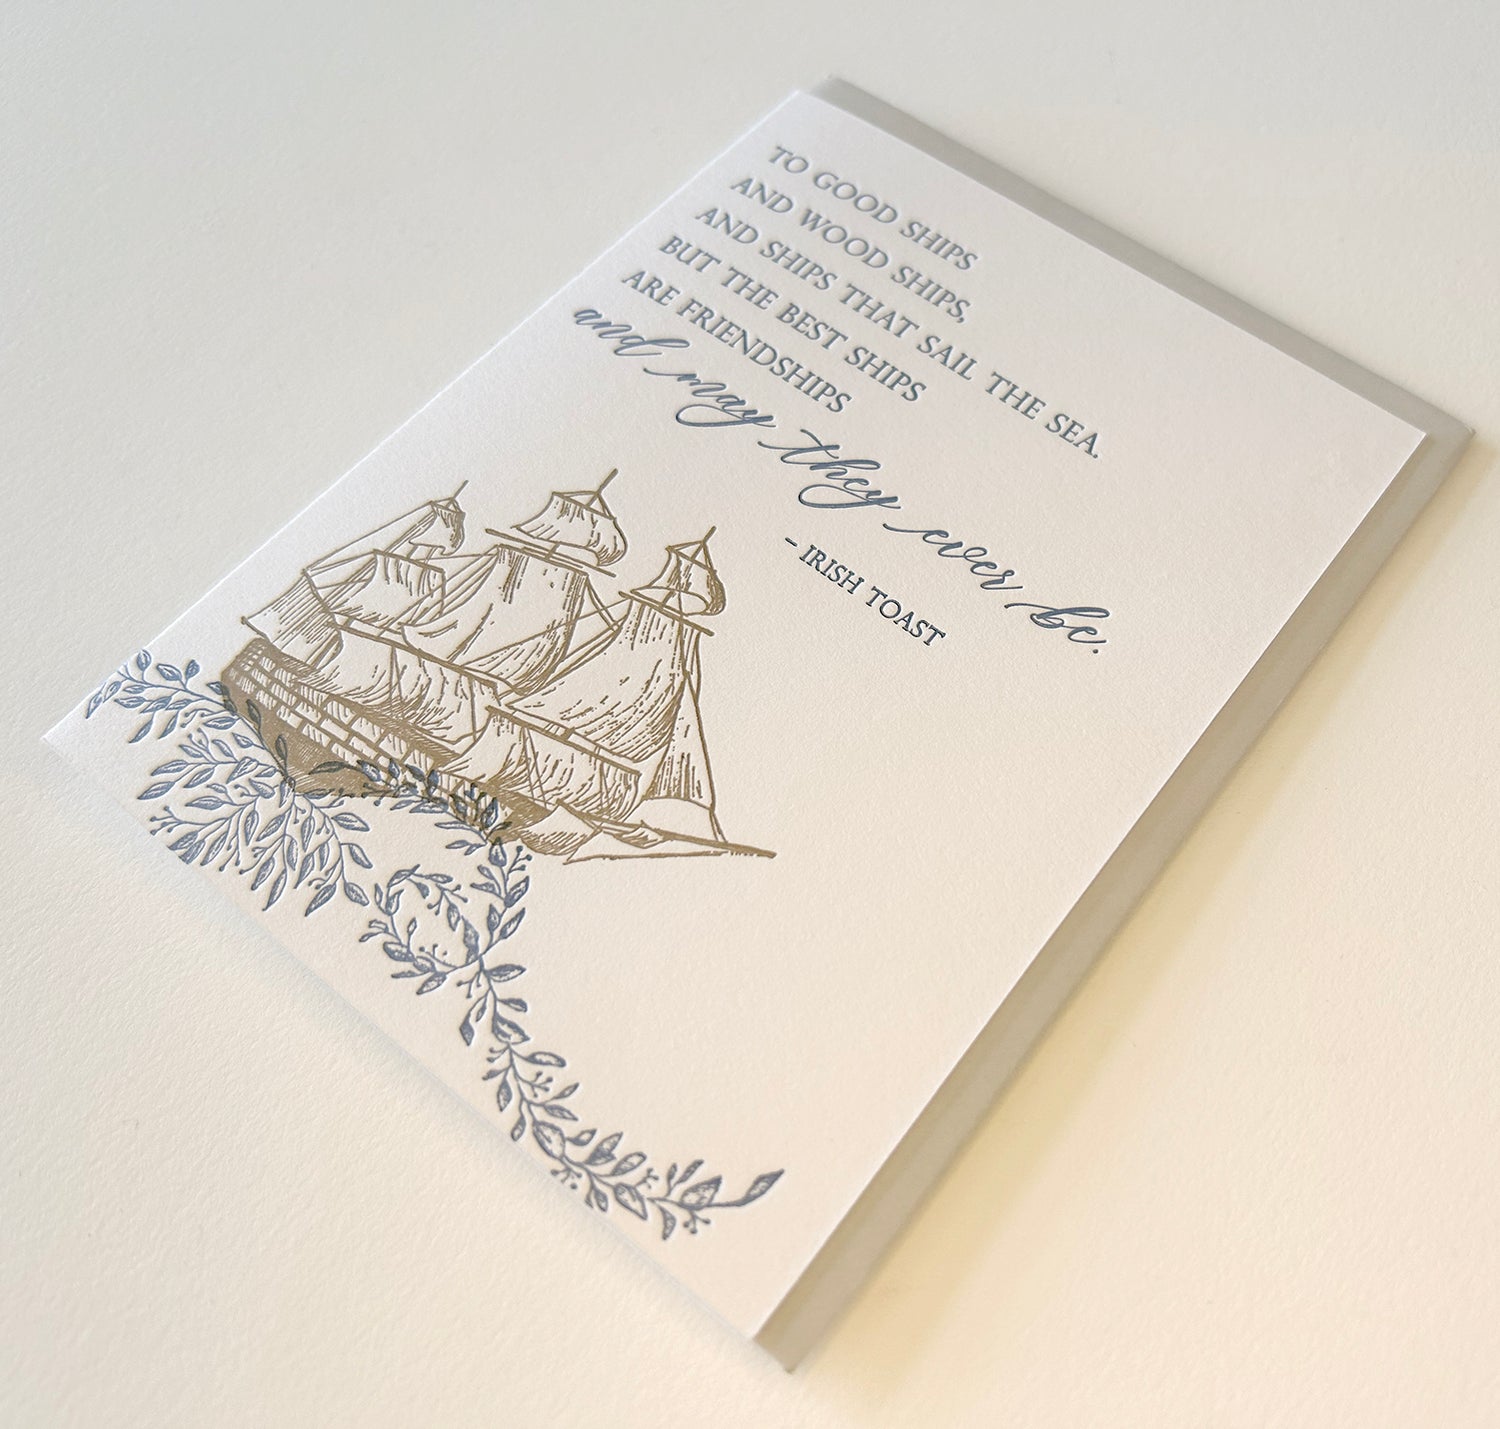 Letterpress friendship card with florals and a ship that says "'To good ships and wood ships, and ships that sail the sea. But the best ships are friendships and may they ever be.- Irish Toast'" by Rust Belt Love